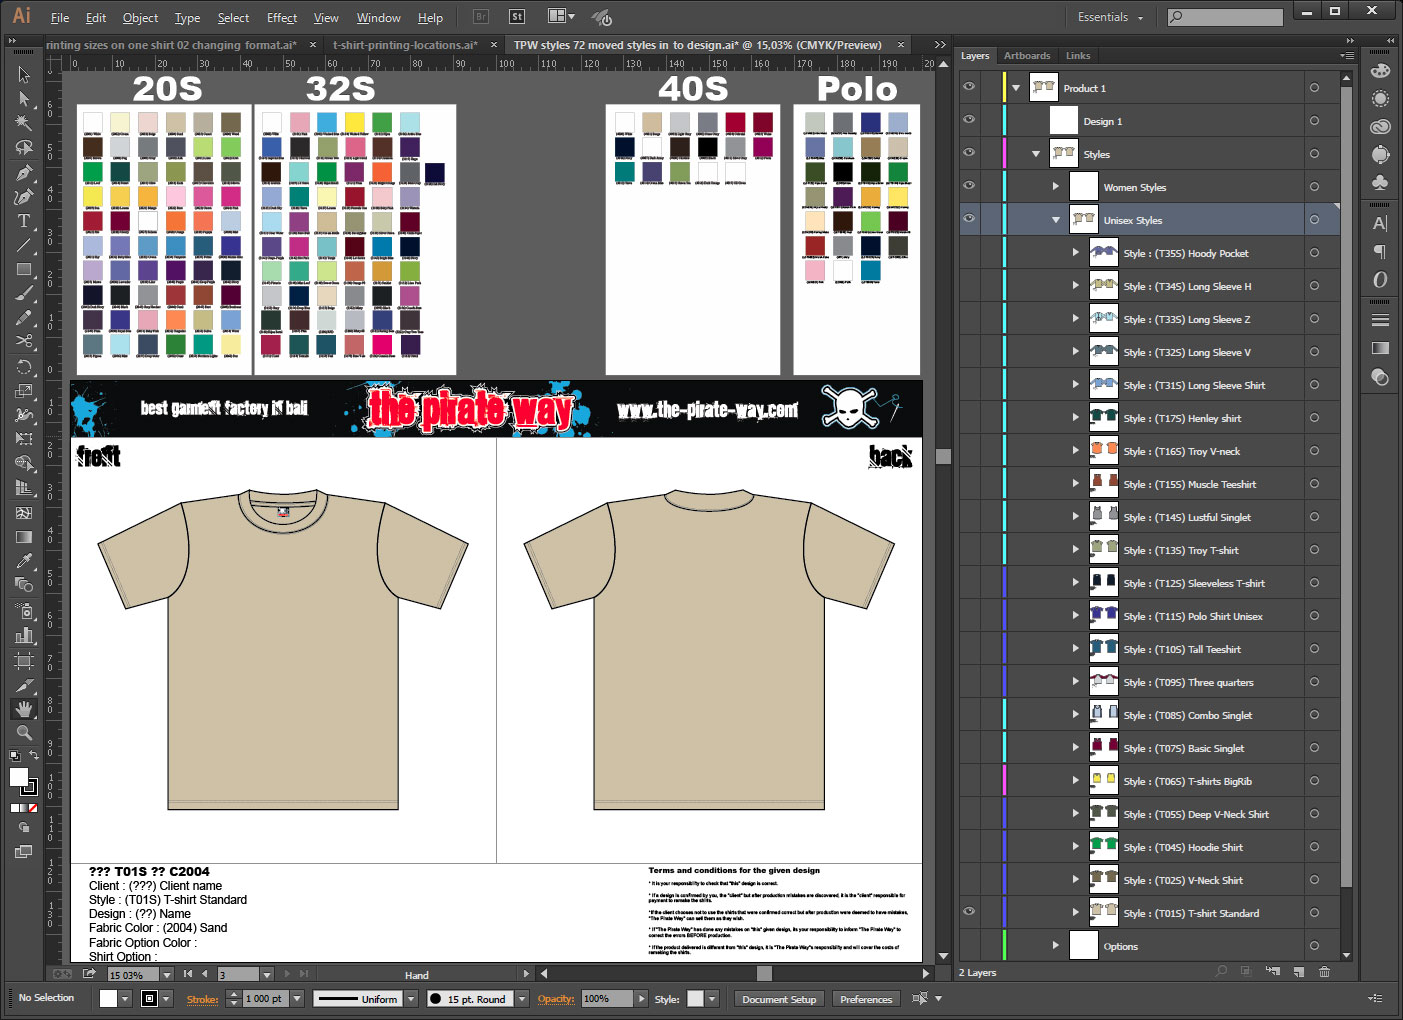 Download and use our shirts template